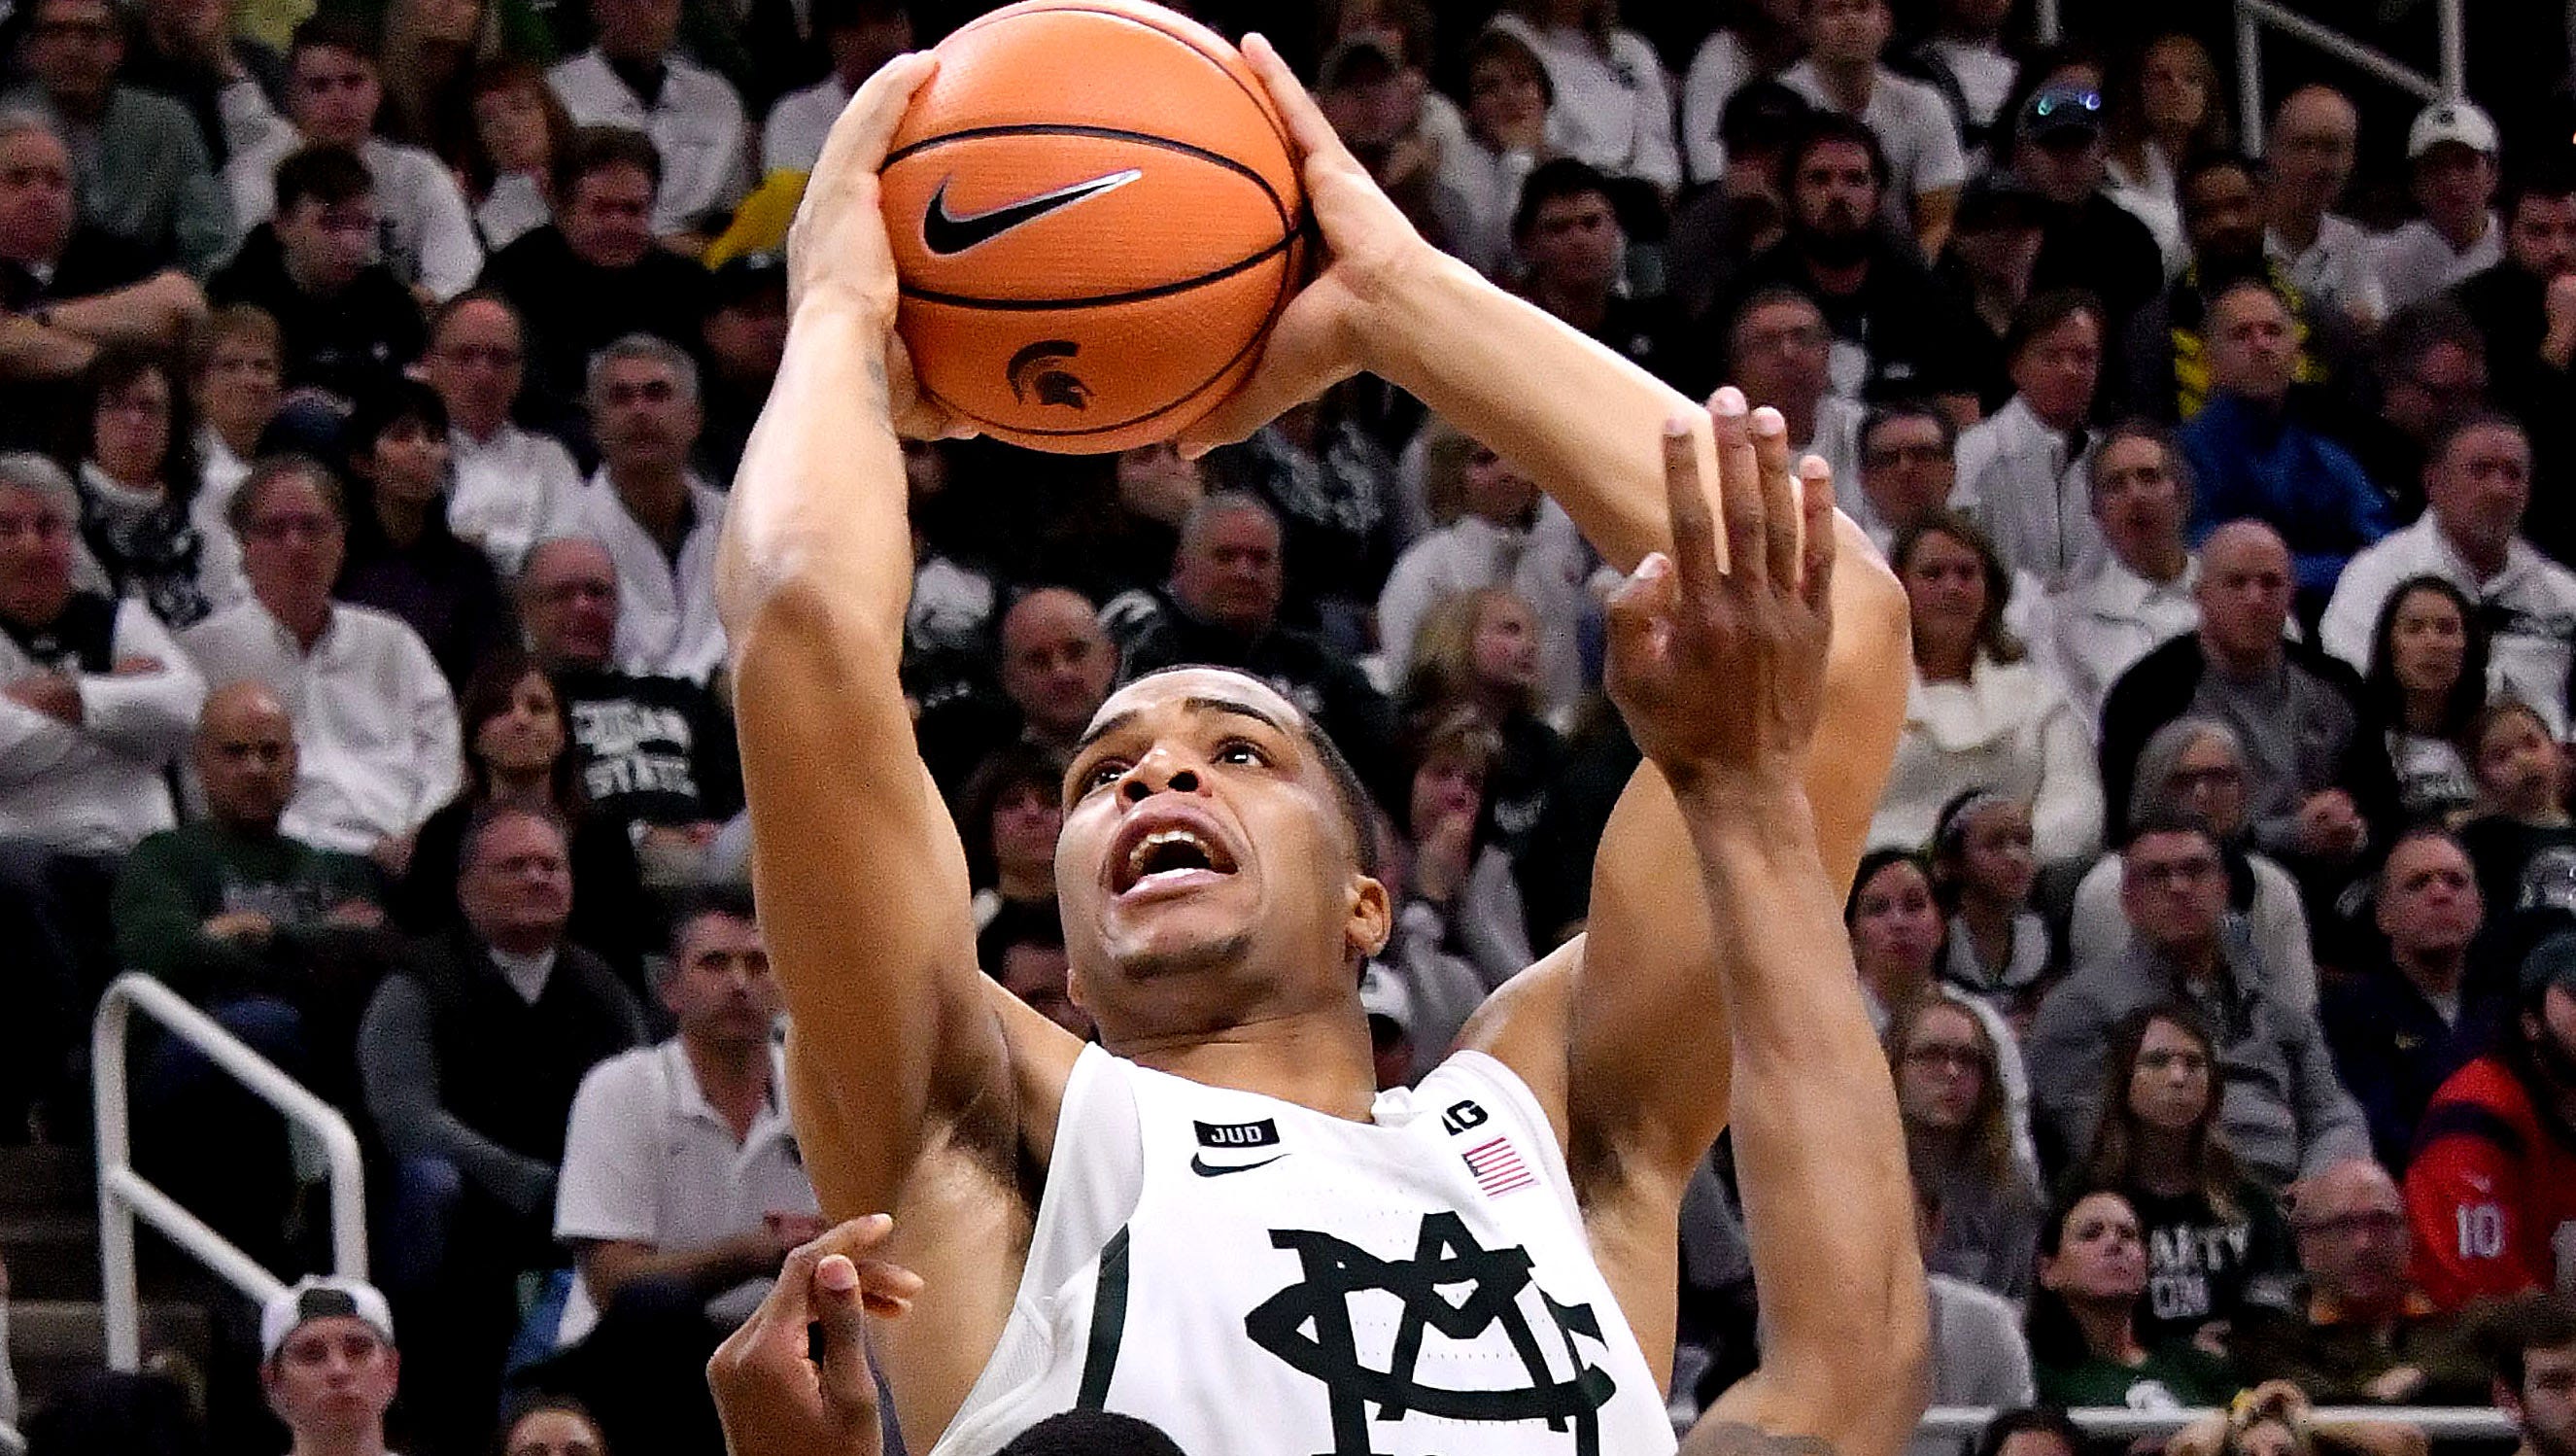 12. Los Angeles Clippers: Miles Bridges, F, Soph., Michigan State. The fast-paced style of the Clippers could be the best fit for Bridges, who is an explosive scorer and dunker on the offensive end. He shot a respectable 37 percent on 3-pointers as a sophomore, and he's probably better suited for the NBA game, where he can play both forward spots well, especially on the defensive end.